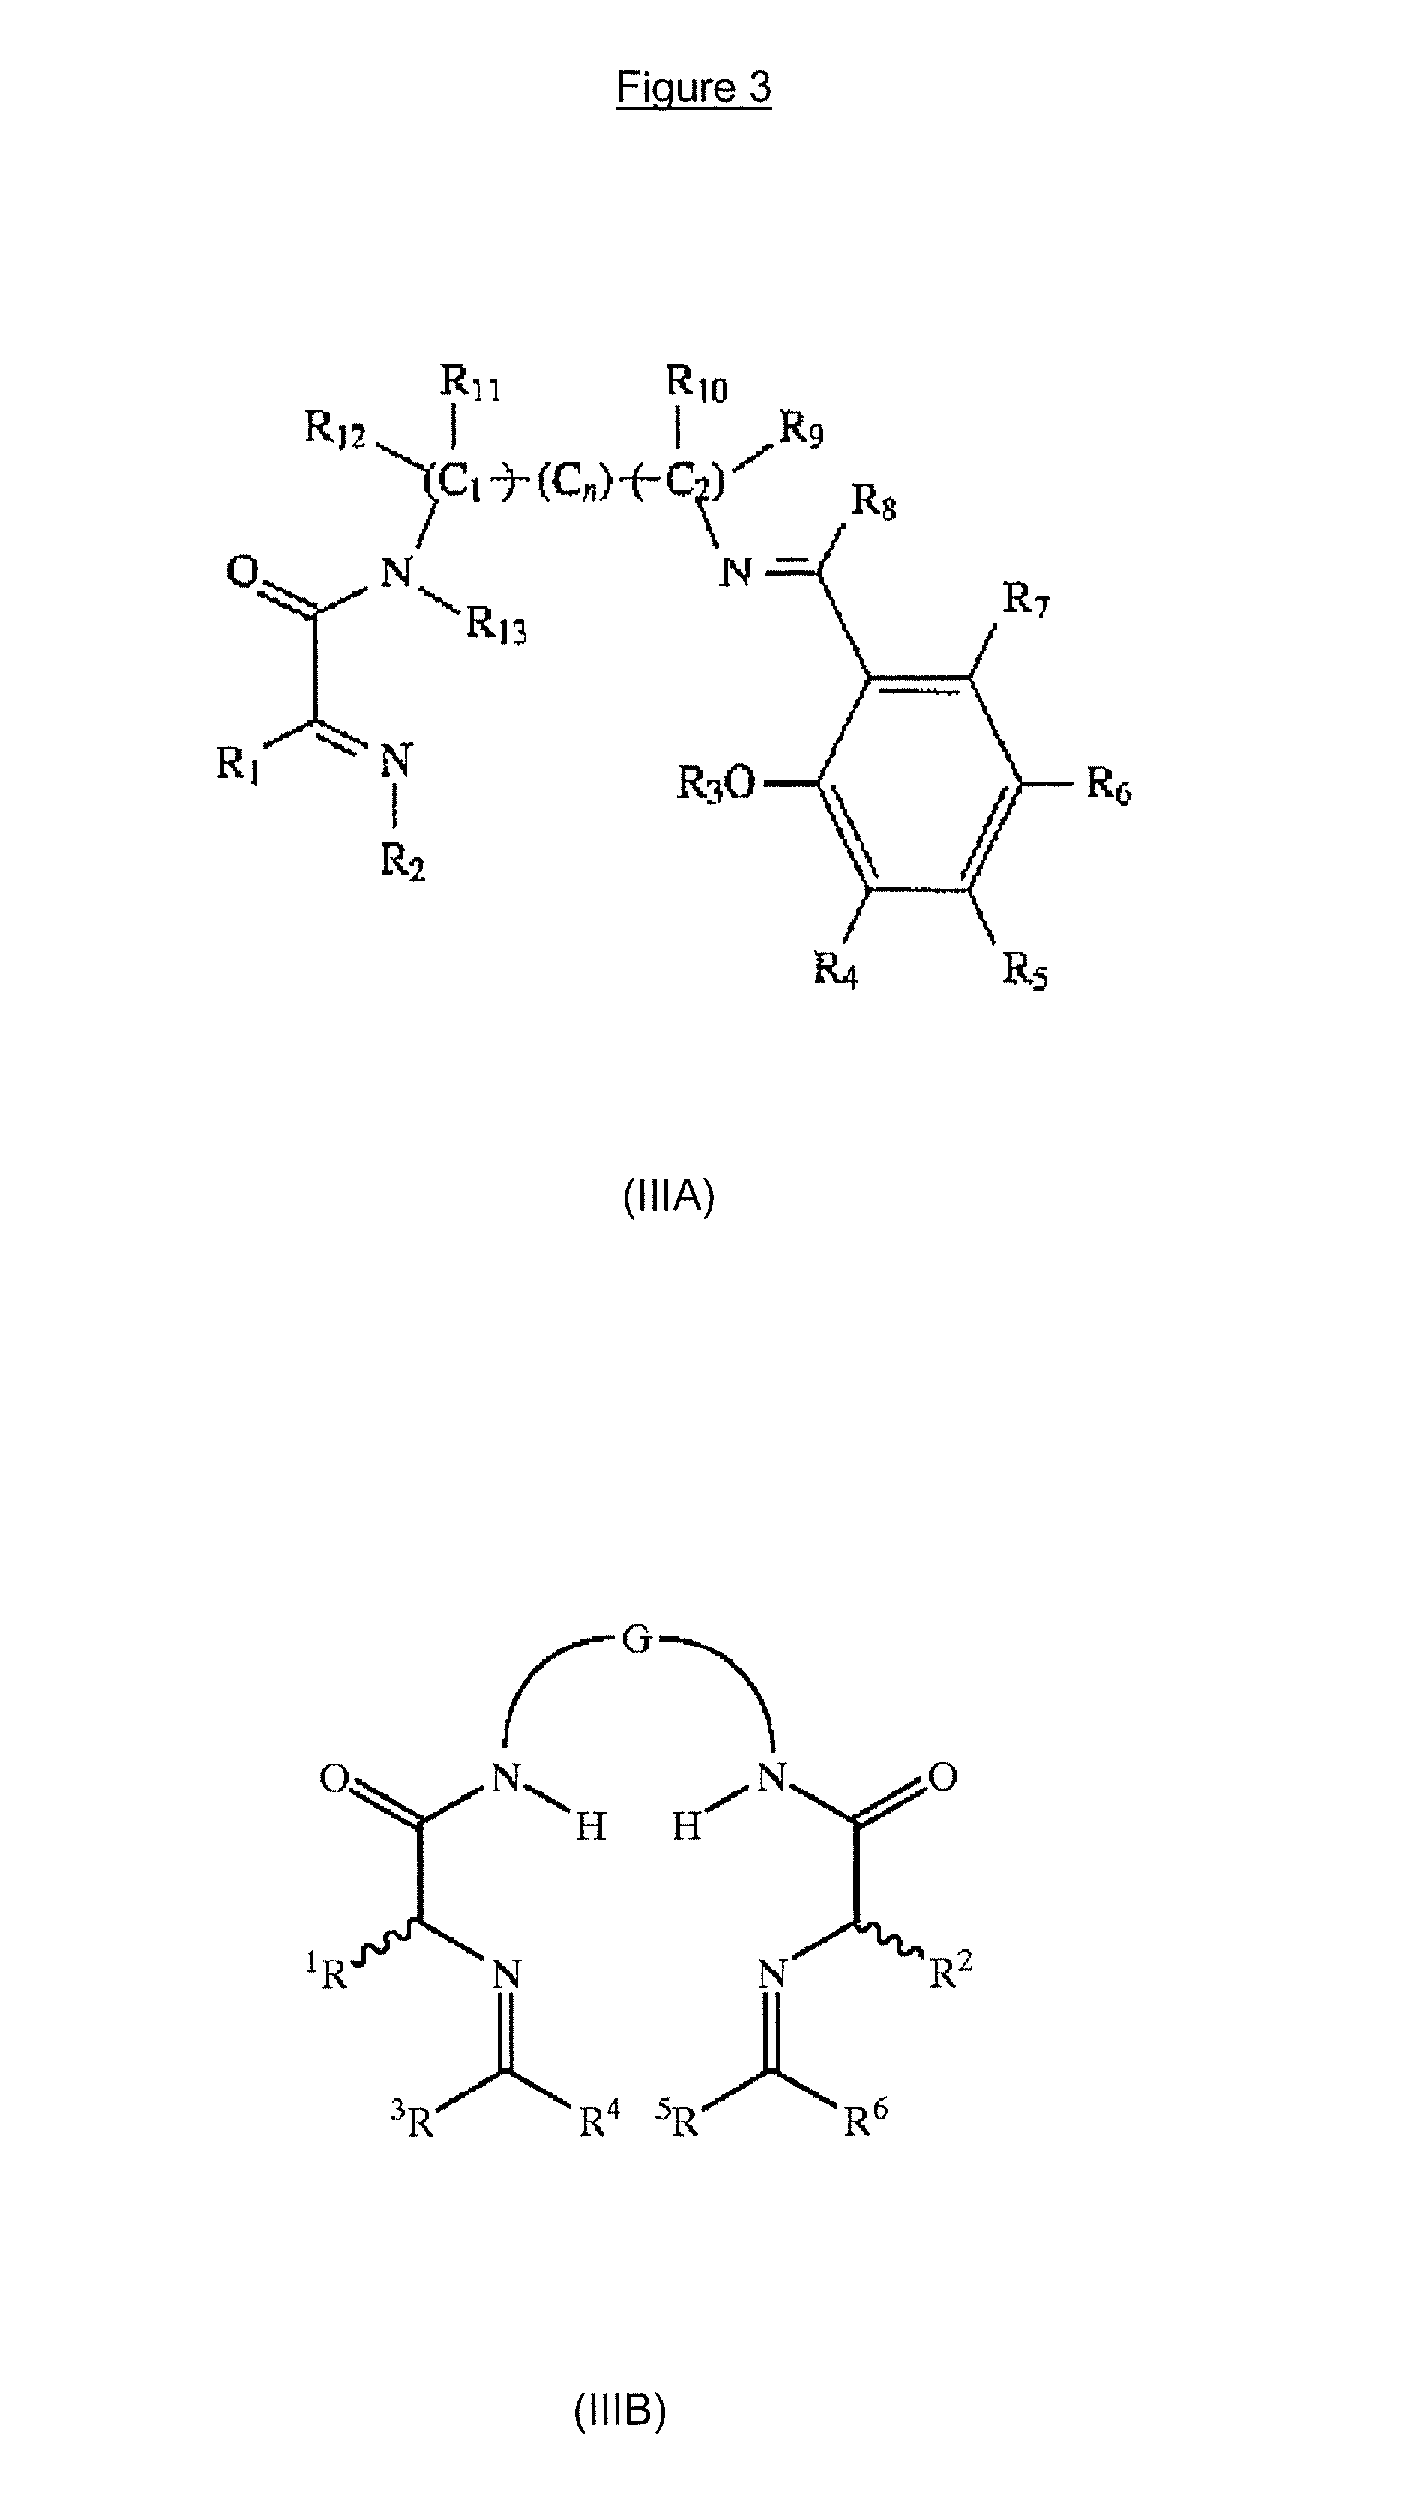 Multicoordinated metal complexes for use in metathesis reactions